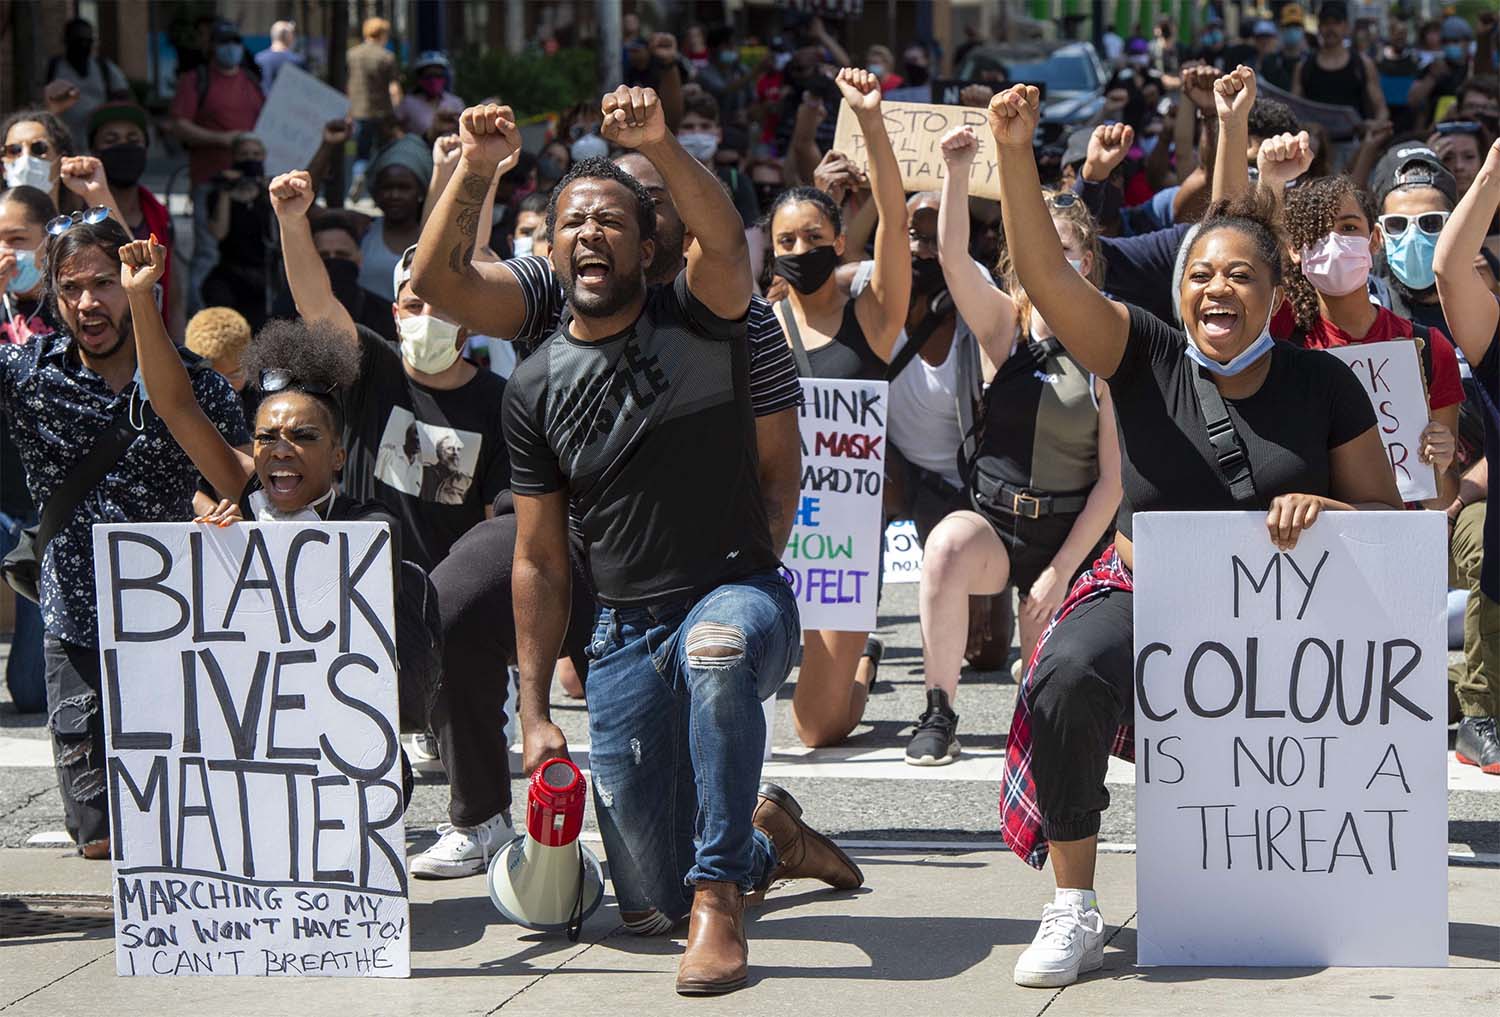 Anti-racism demonstrators take a knee near Toronto Police Headquarters during a march on Saturday, June 6, 2020, protesting the death of George Floyd